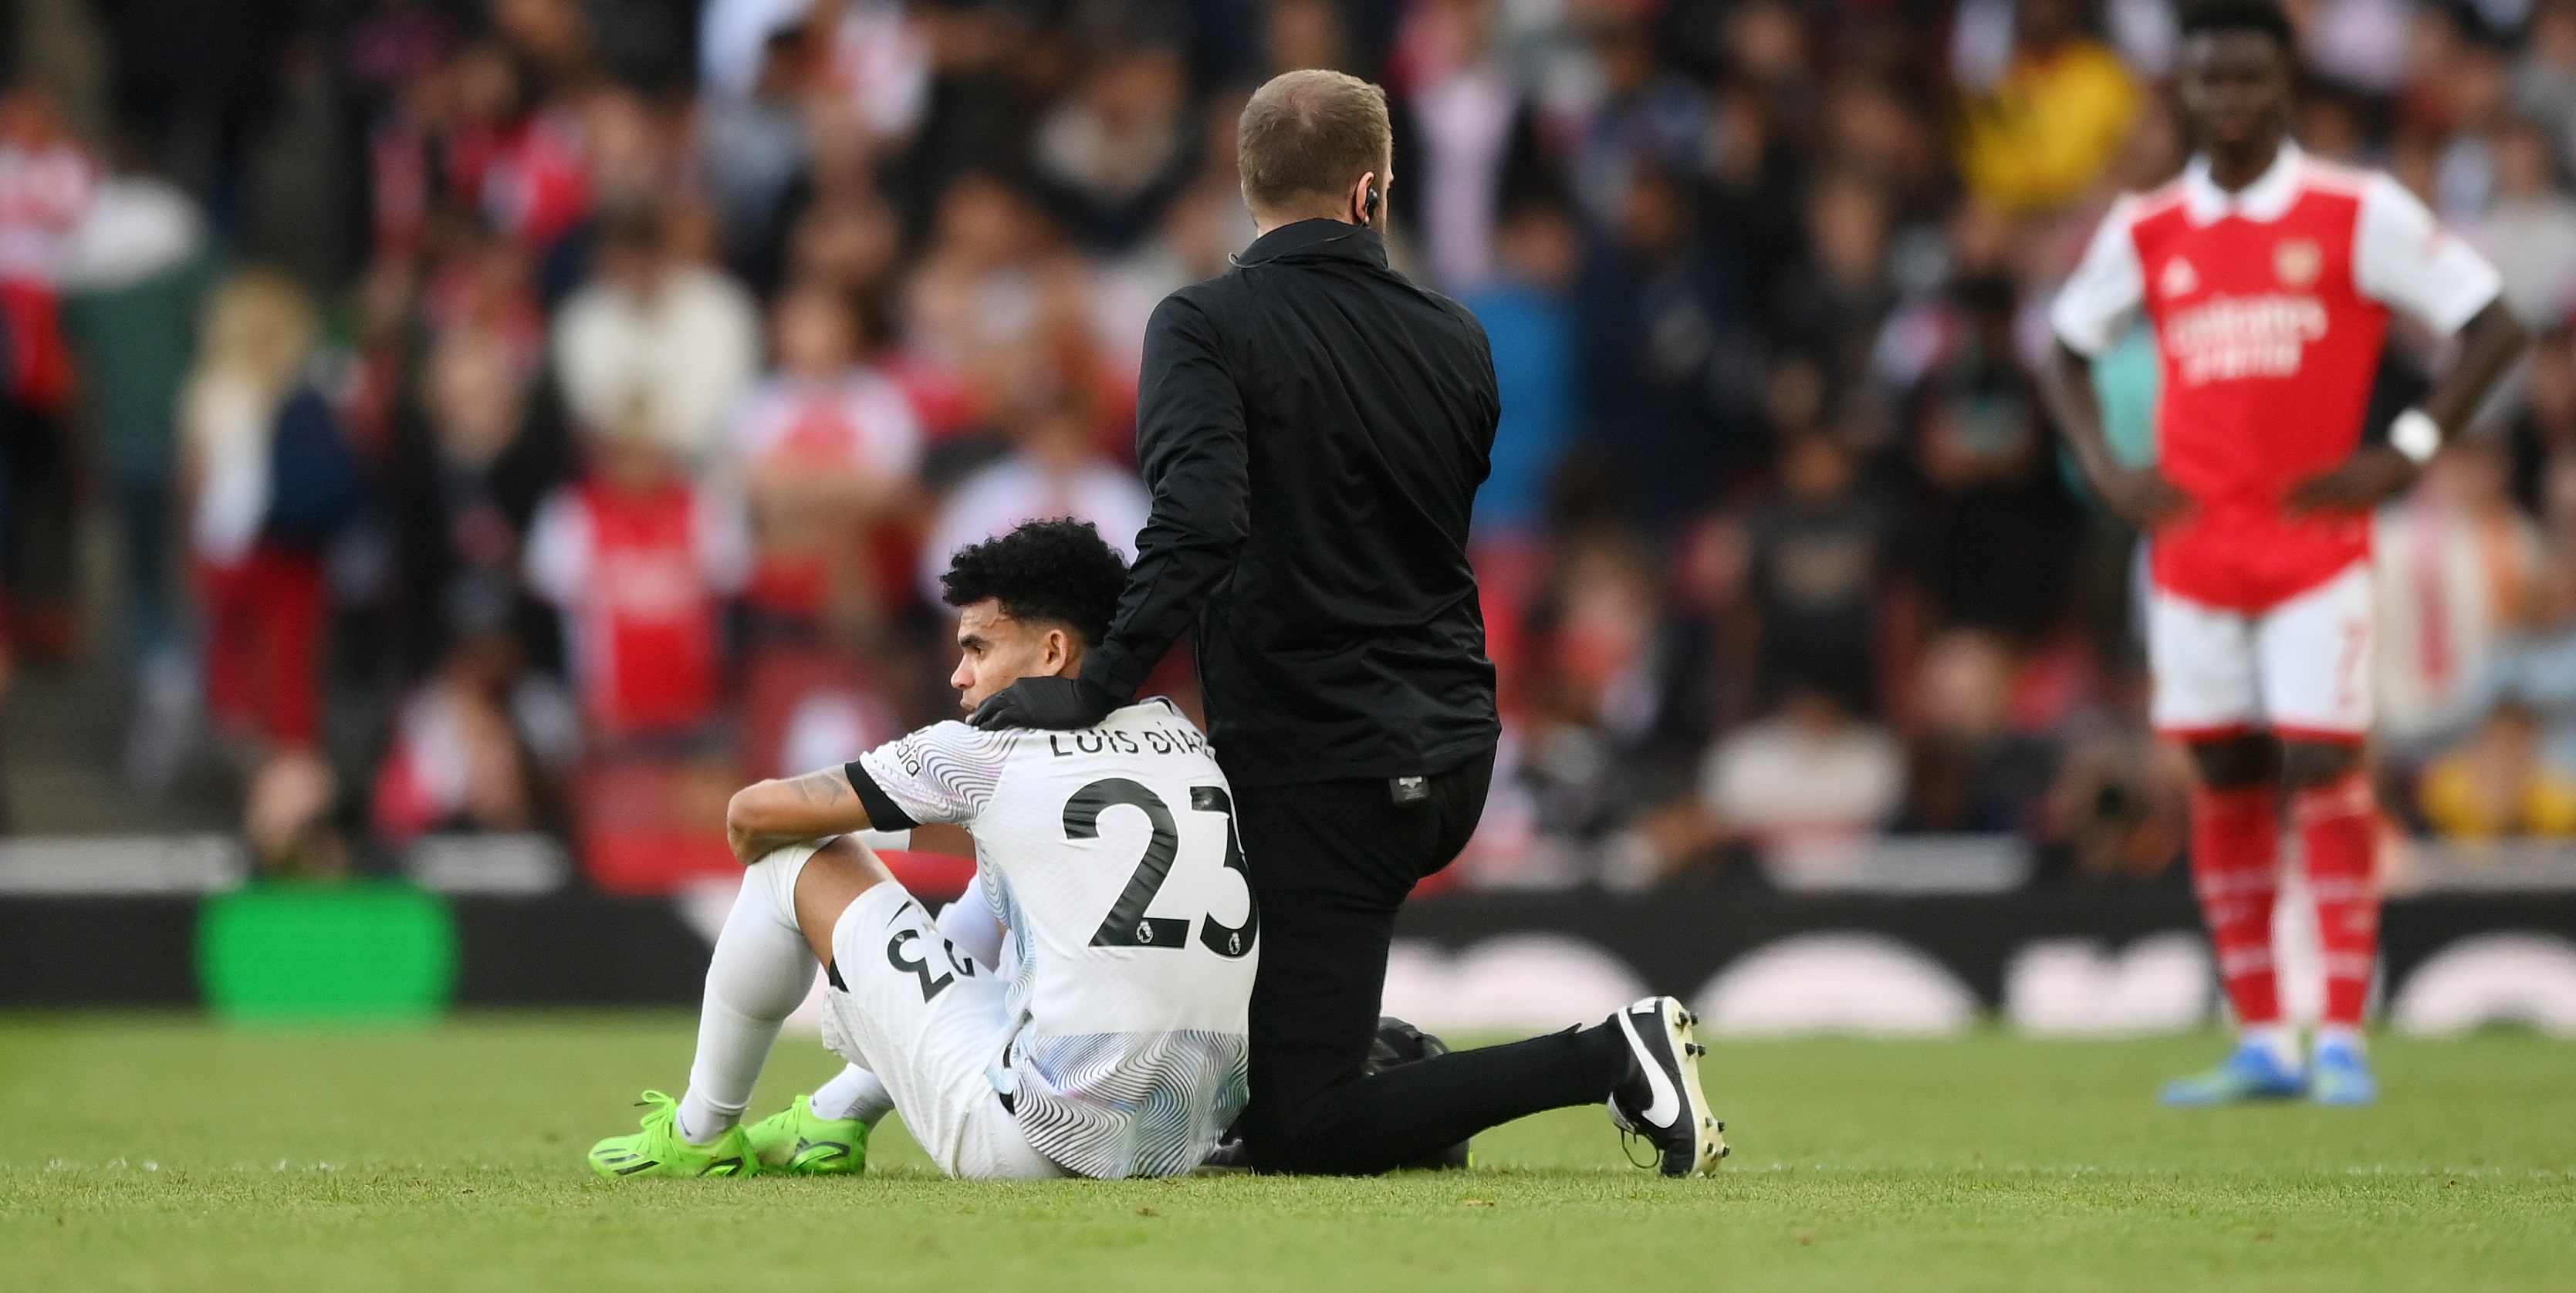 Luis Diaz raises fears of potentially serious Liverpool injury after early substitution at Arsenal